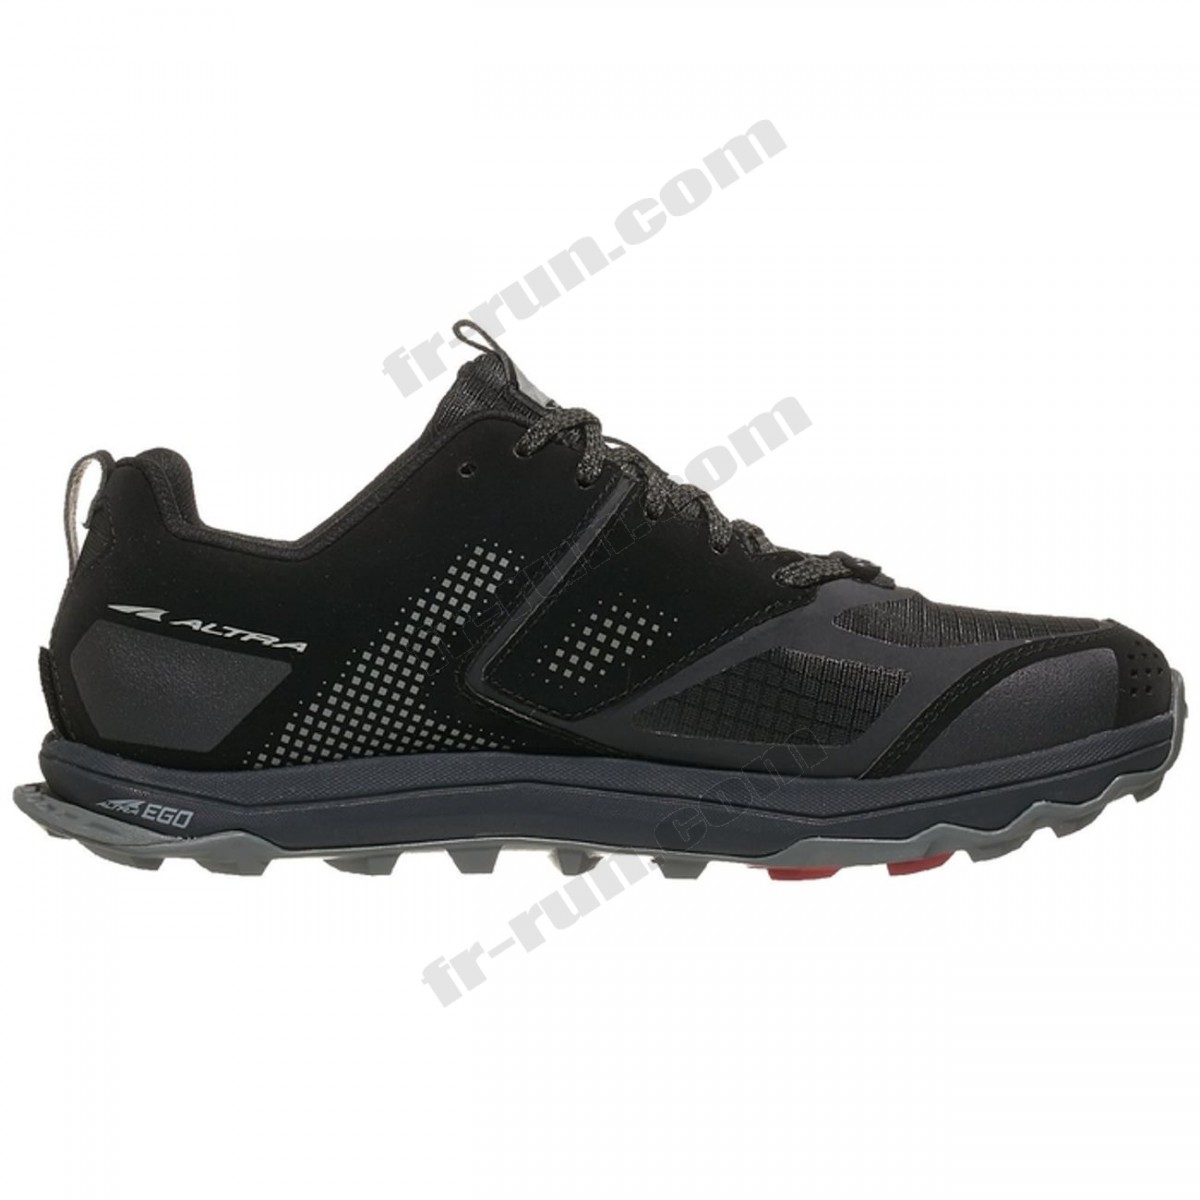 Altra/CHAUSSURES BASSES running homme ALTRA M LONE PEAK 5 ◇◇◇ Pas Cher Du Tout - Altra/CHAUSSURES BASSES running homme ALTRA M LONE PEAK 5 ◇◇◇ Pas Cher Du Tout